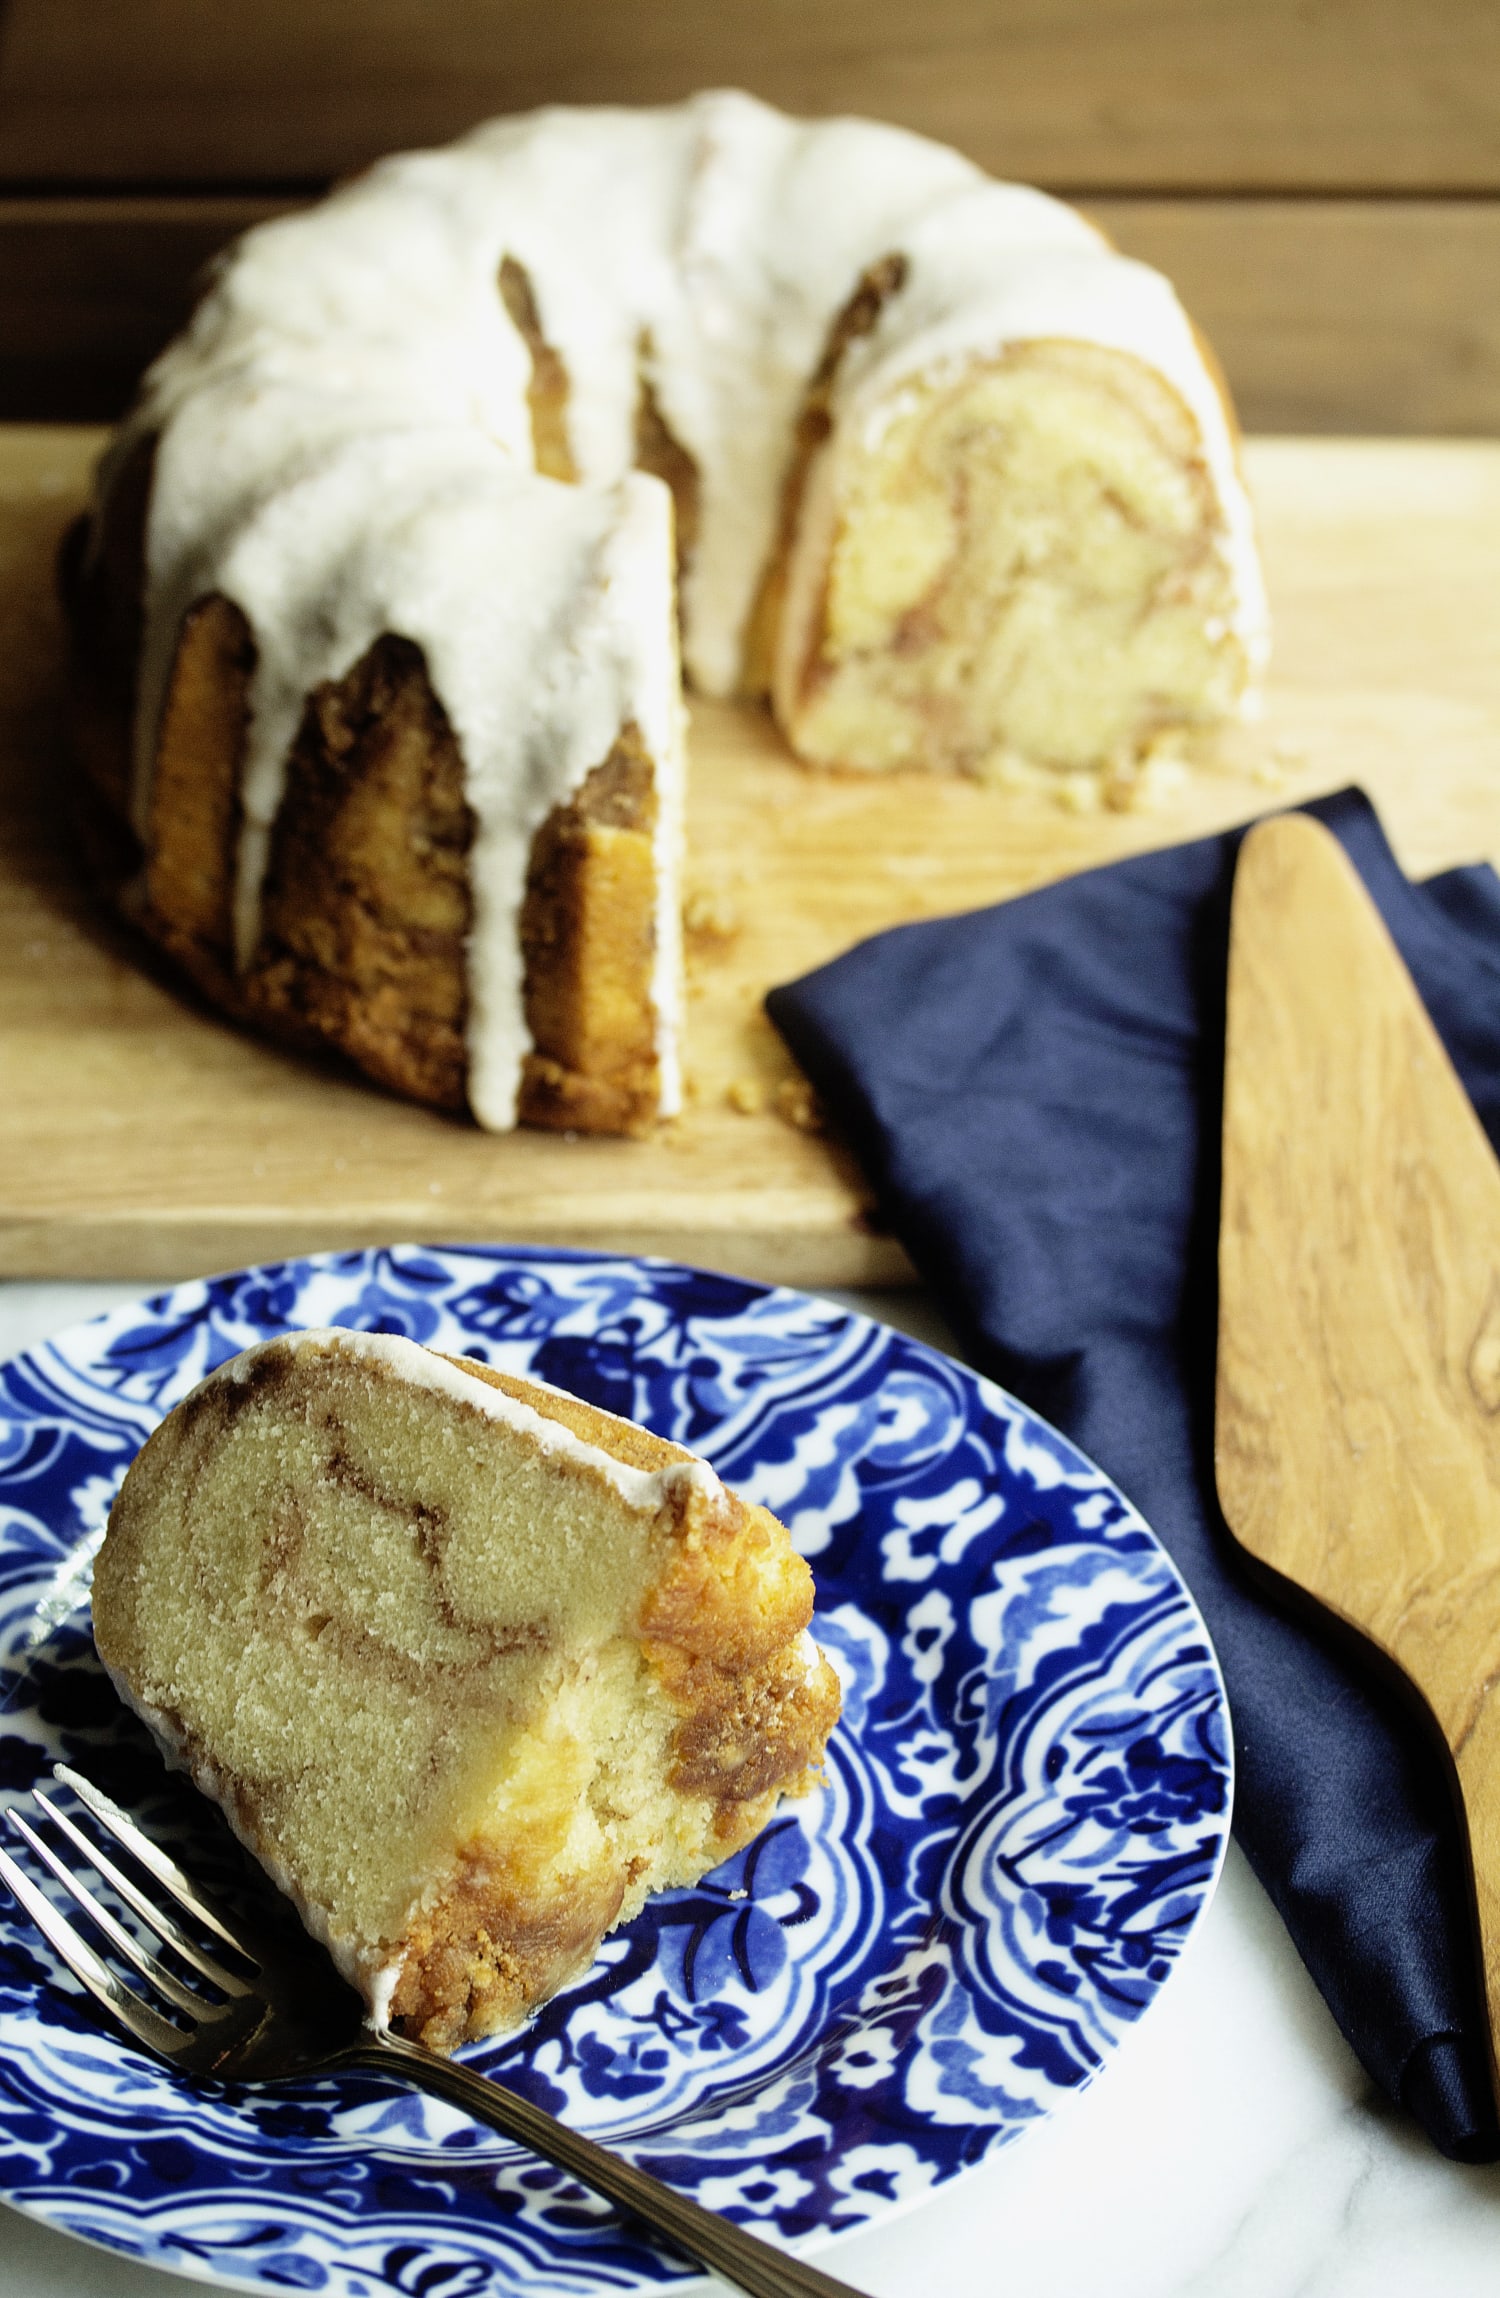 Cinnamon Sugar Pound Cake (from scratch) - Out of the Box Baking